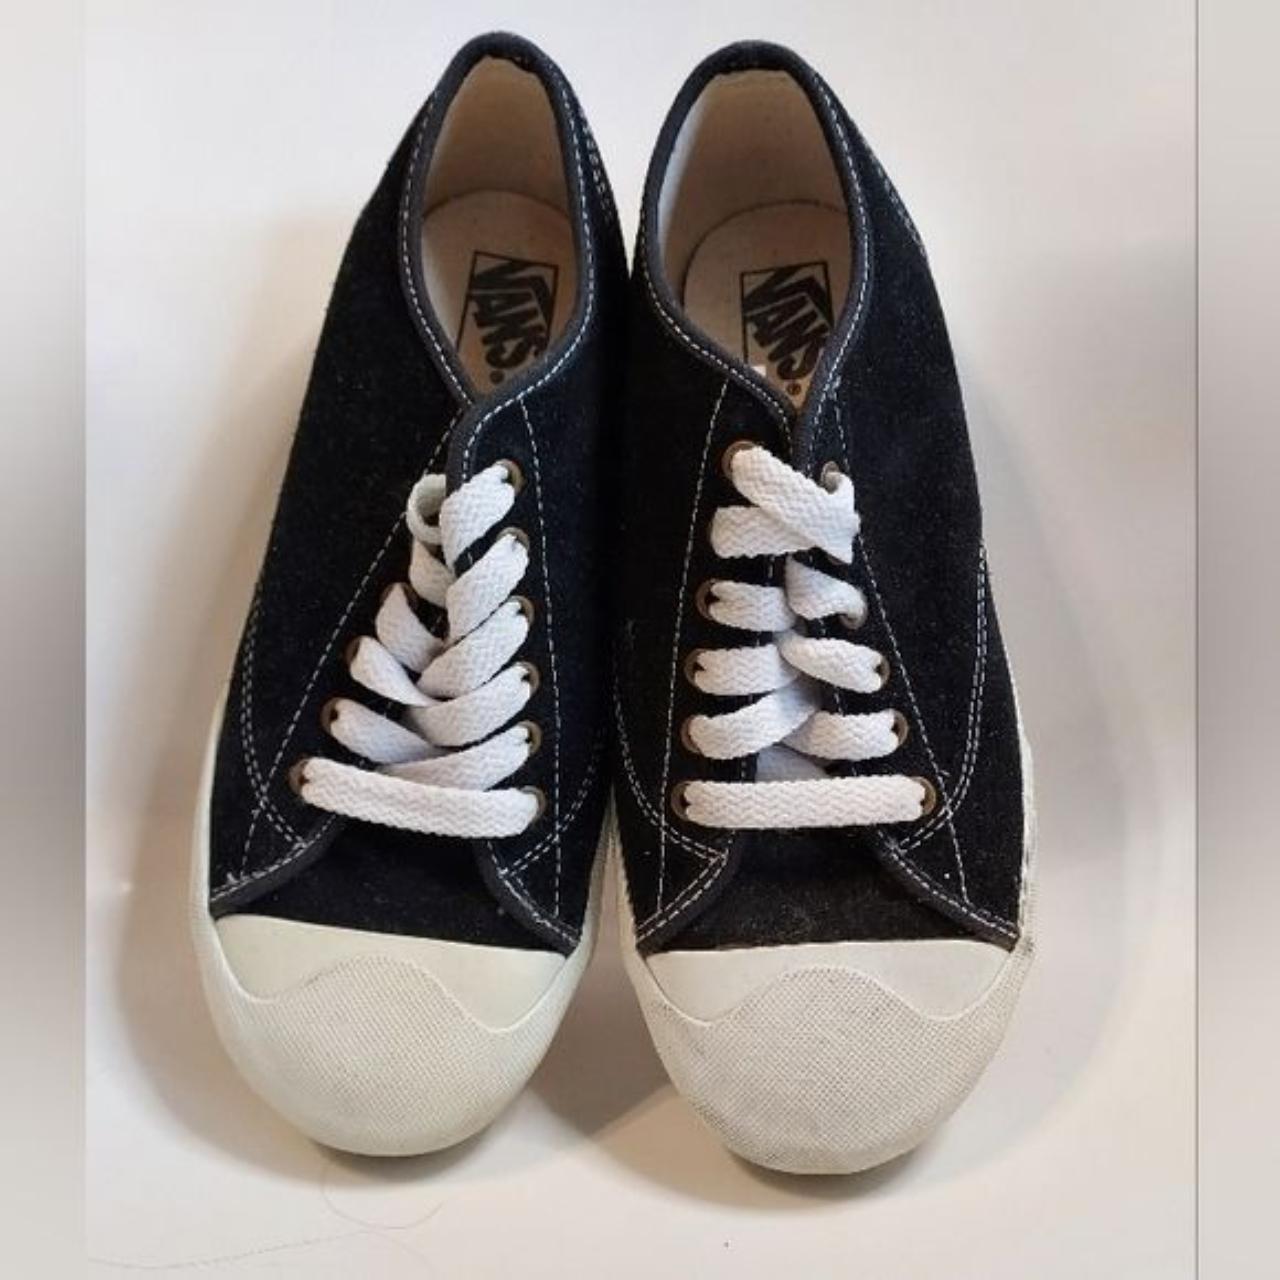 Circa early 2000s--this shoe was not in production... - Depop